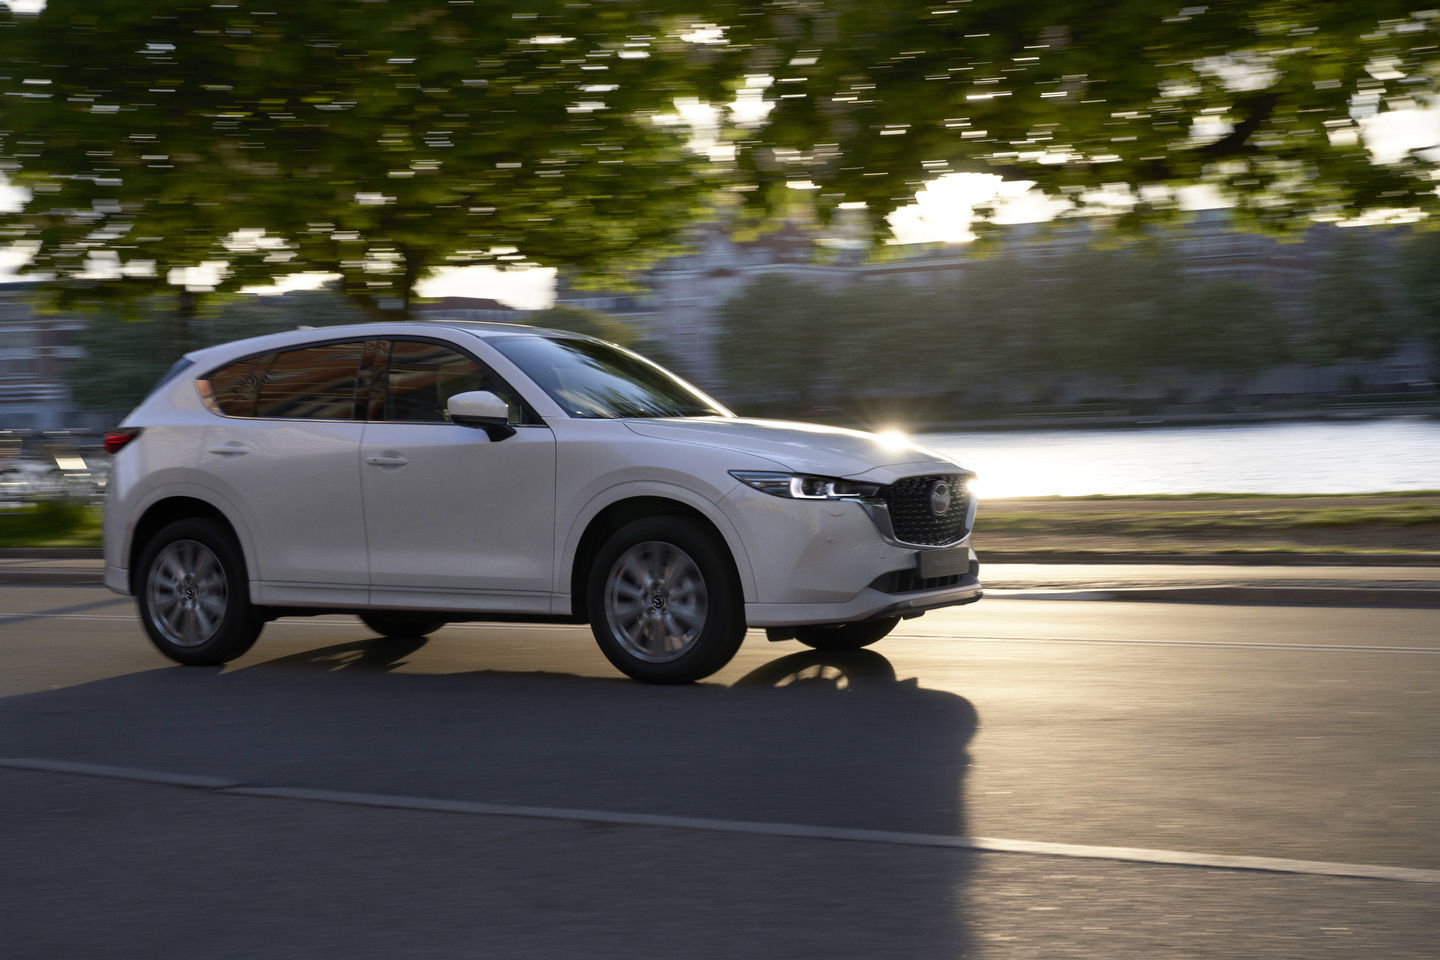 New 2022 Mazda CX-5 offers standard i-ACTIV all-wheel drive among many improvements